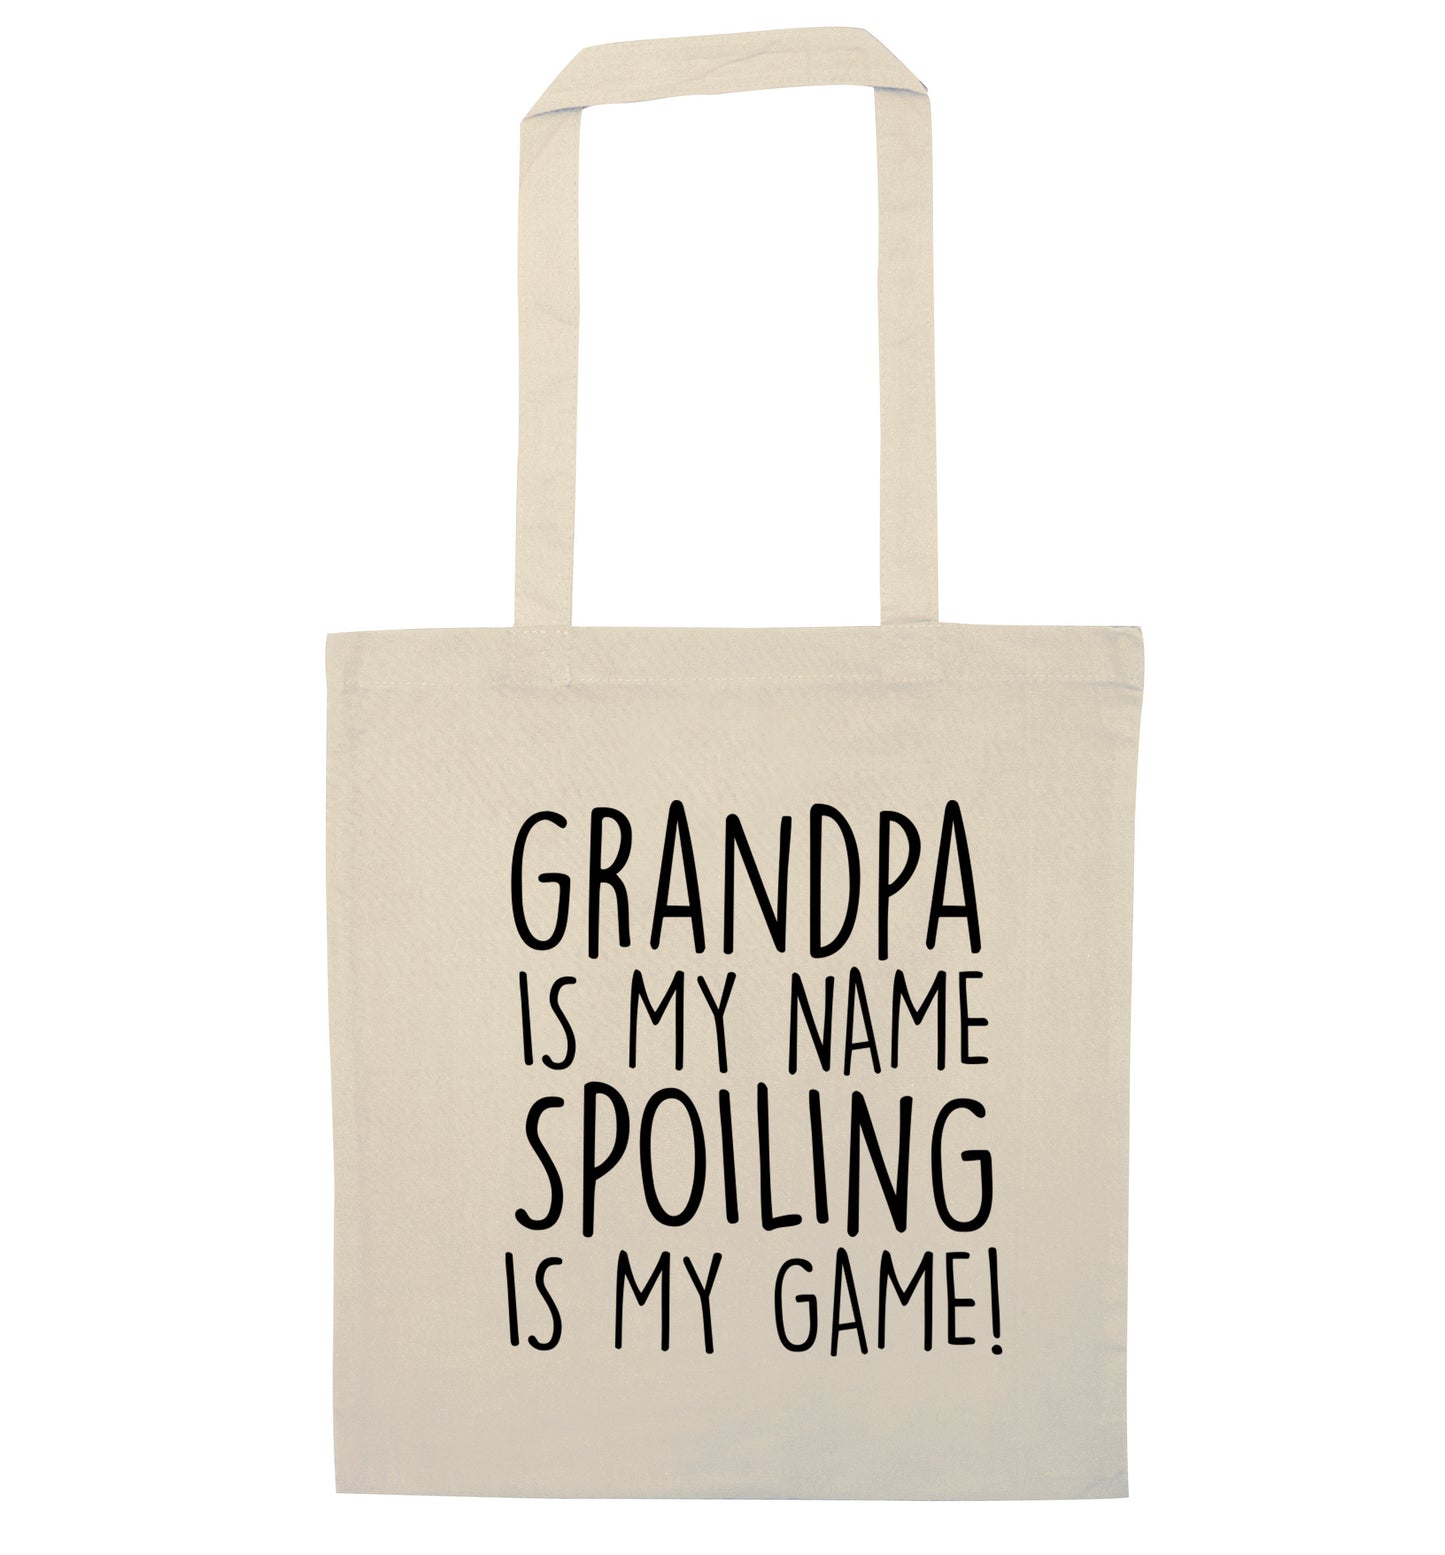 Grandpa is my name, spoiling is my game natural tote bag